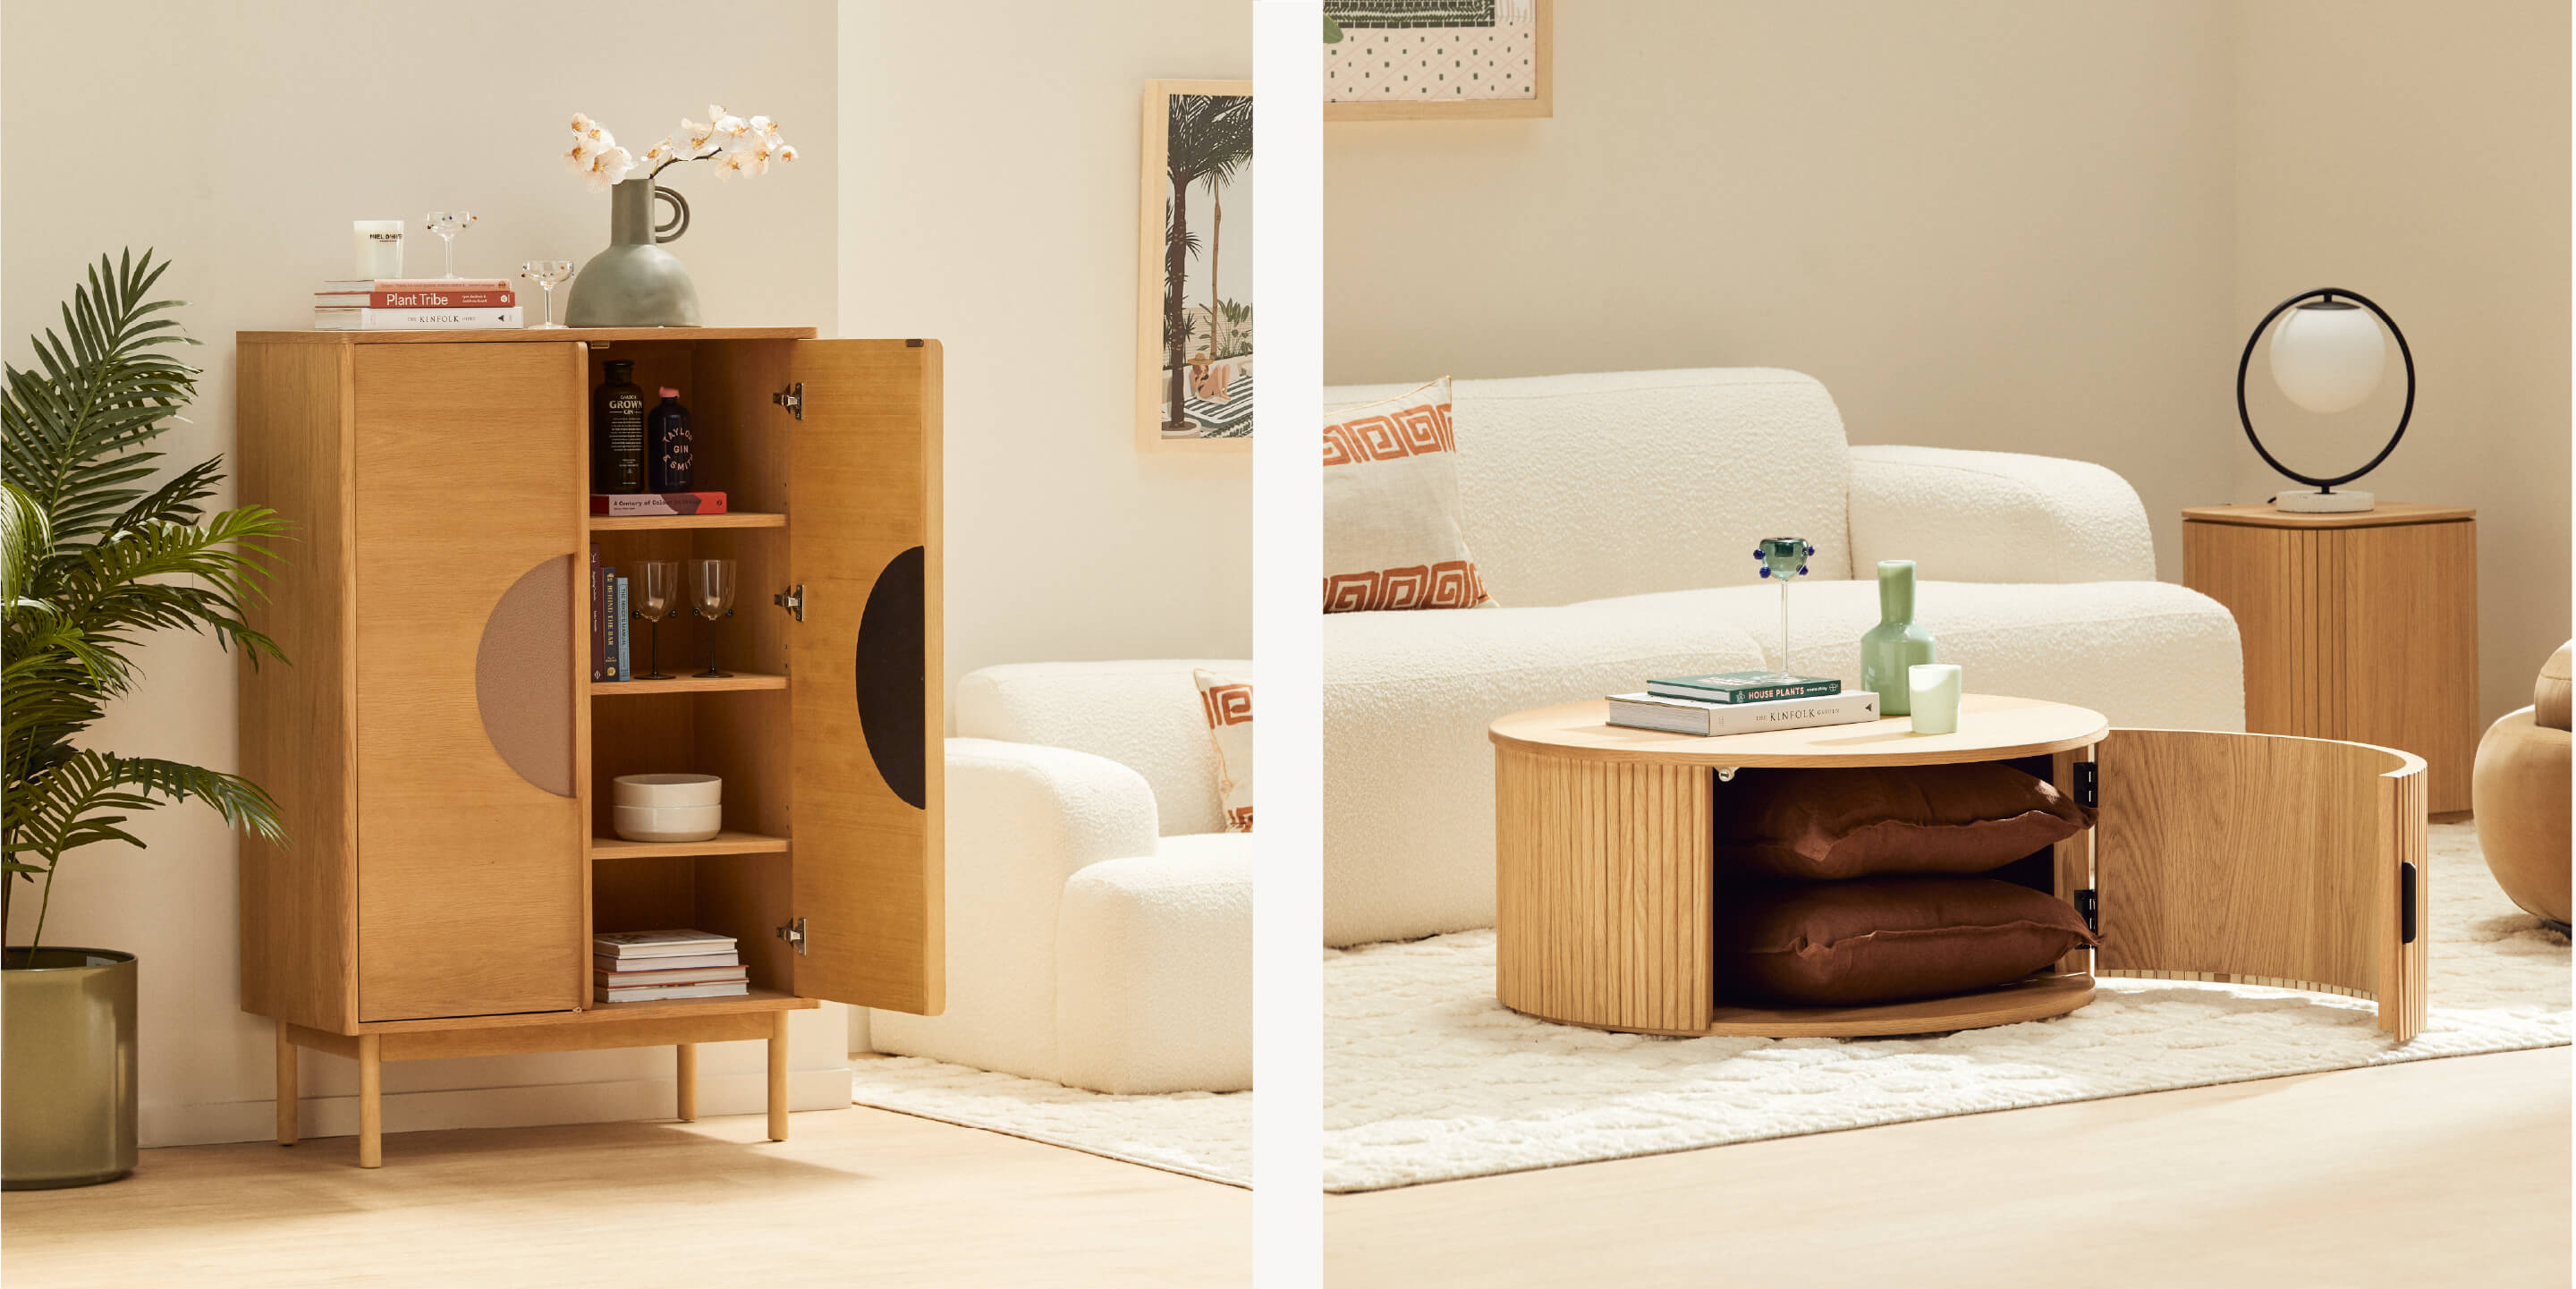 Introducing our Capsule Spring/ Summer 22 collection, the Brooklyn Living space is neutral and contemporary, full of stunning boucle pieces, coffee tables, storage and colourful home decor. Shop the collection online or in-store now!